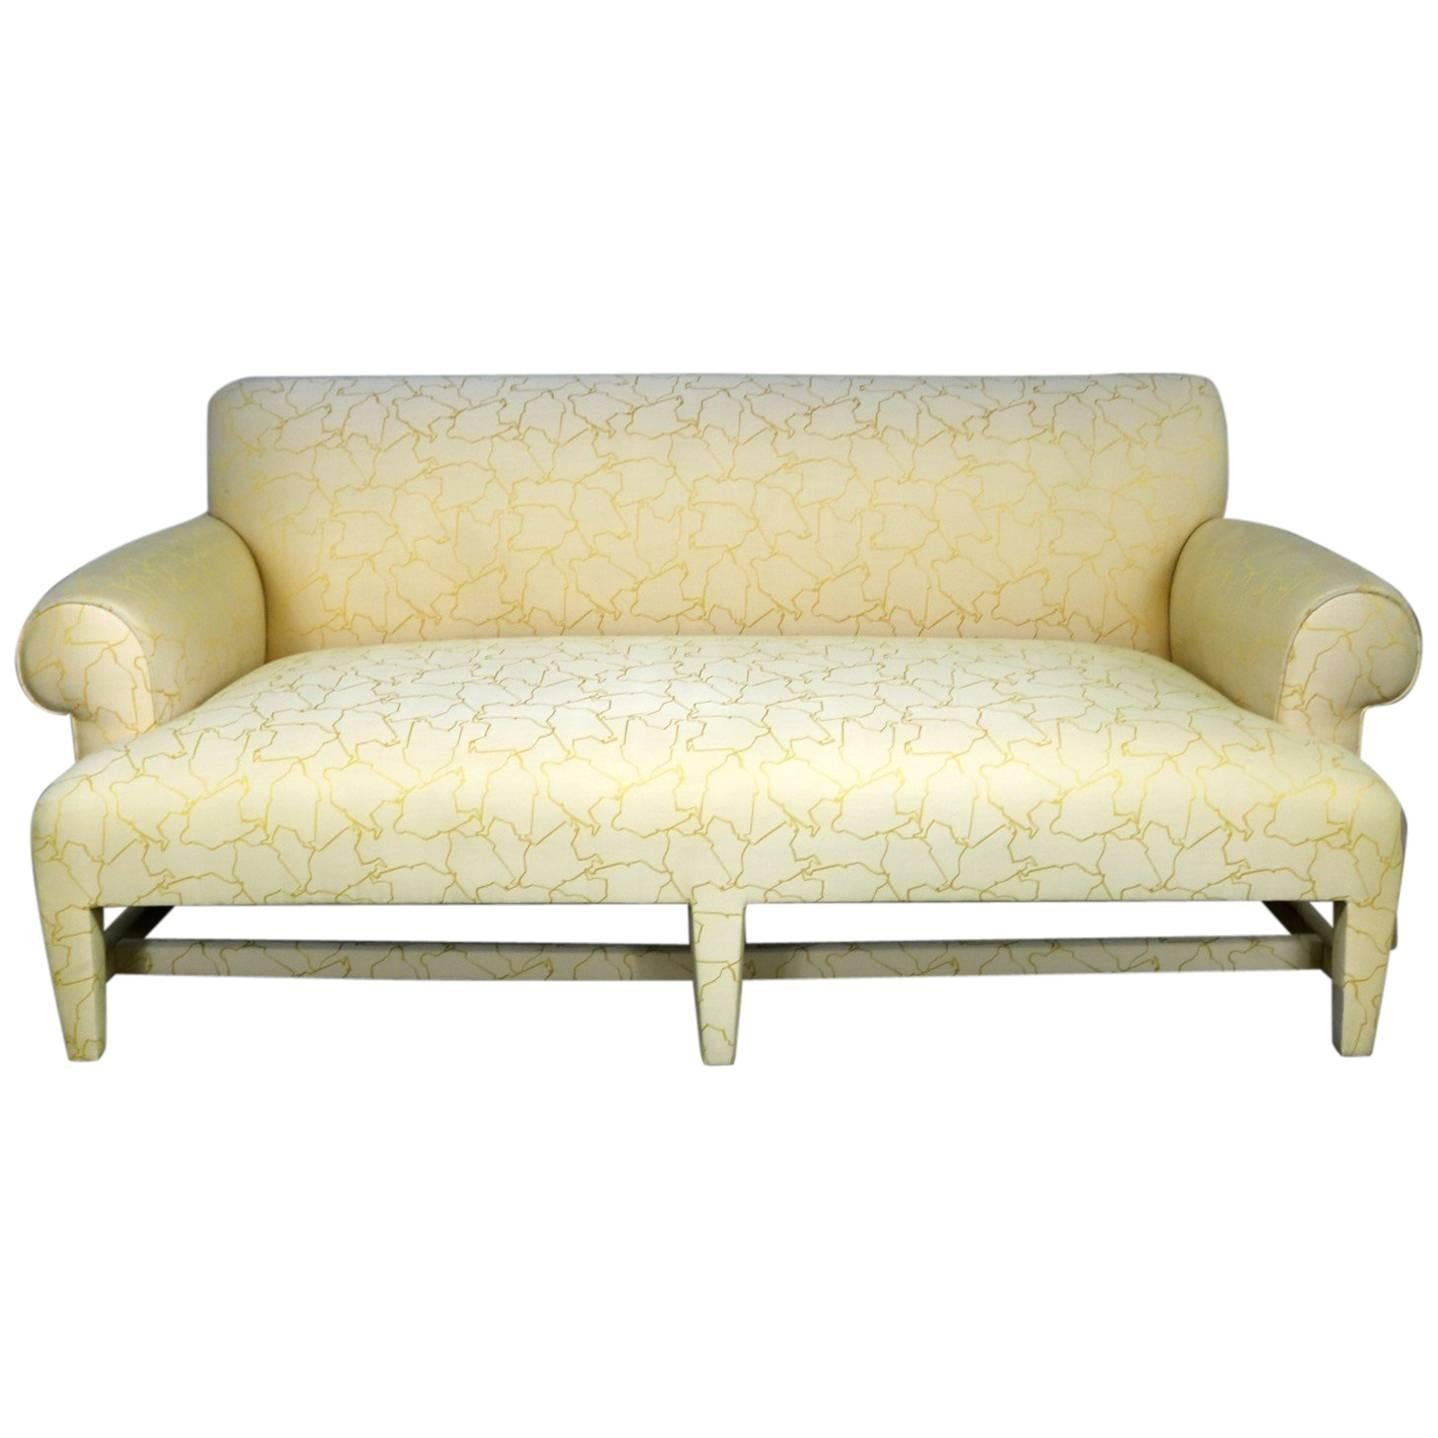 Donghia Loveseat Sofa in Cream and Yellow Fat Man Fabric Attributed to Angelo D